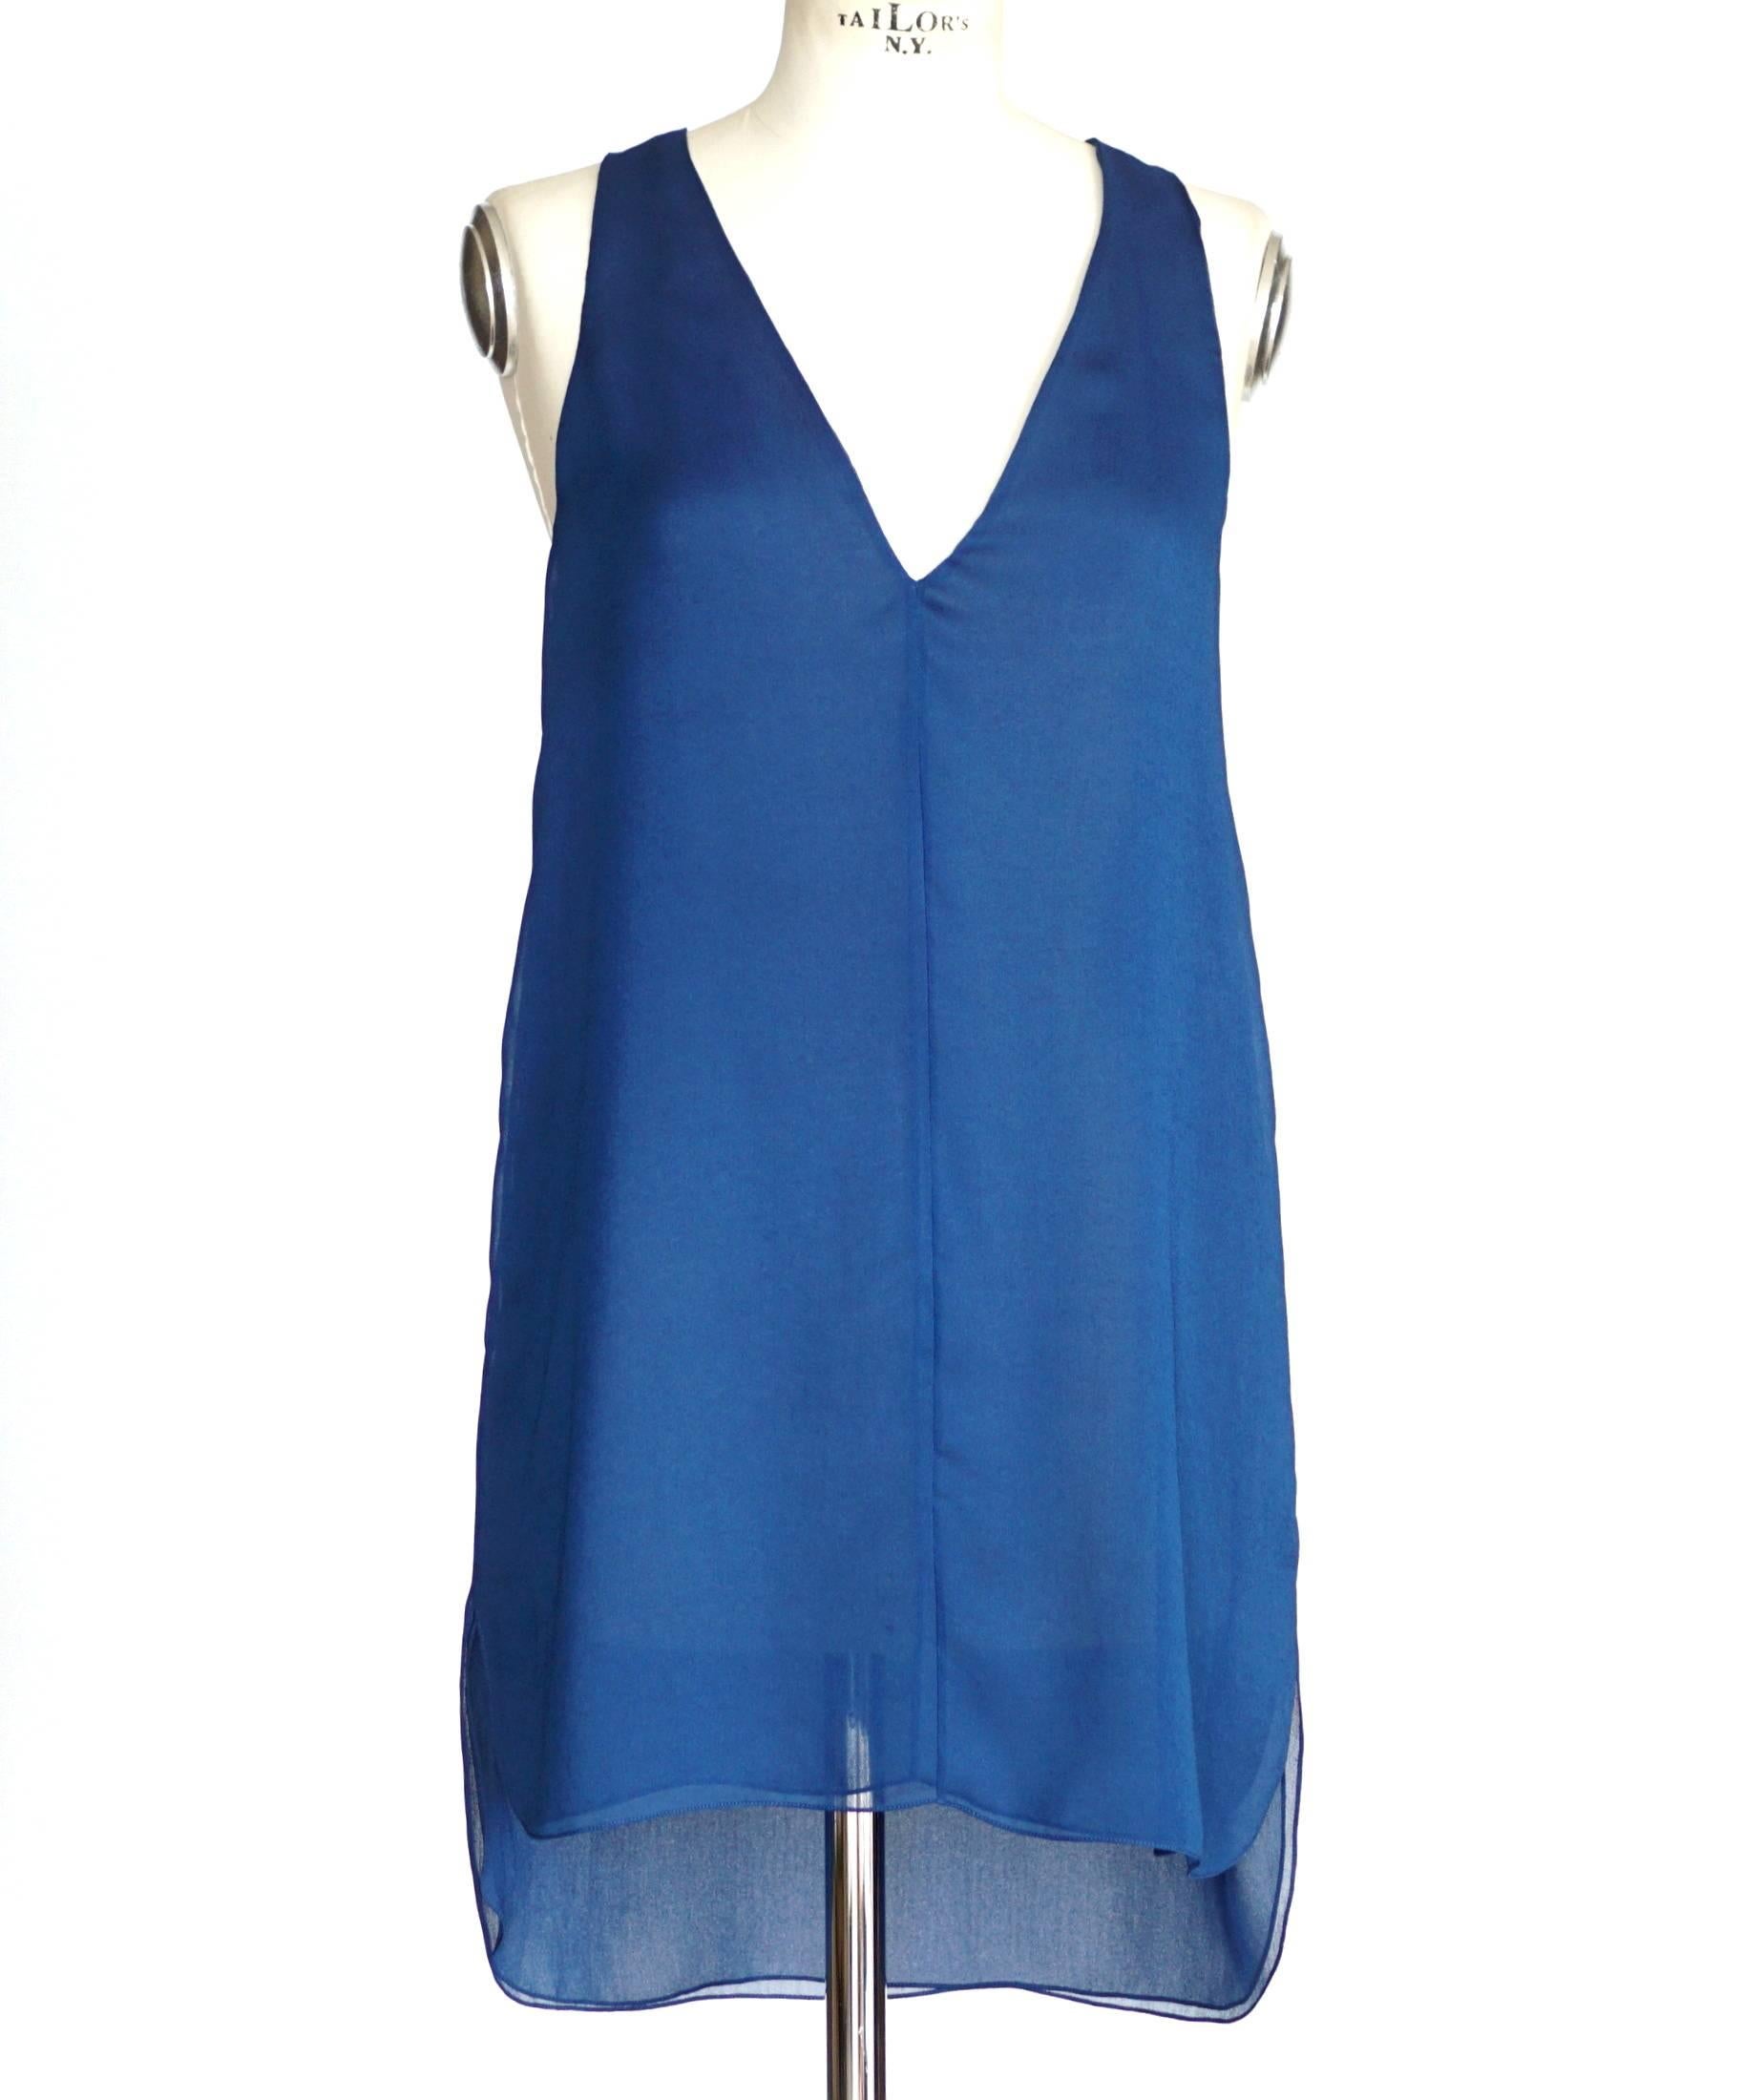 Guaranteed authentic CHLOE pant set in rich jewel toned tuareg blue.
Flowing deep V neck sleeveless tunic slightly longer at rear.
Tunic is semi sheer double layered.
Flat front pant with tapered leg.
Pant has 2 slot pockets at rear.
Fabric is